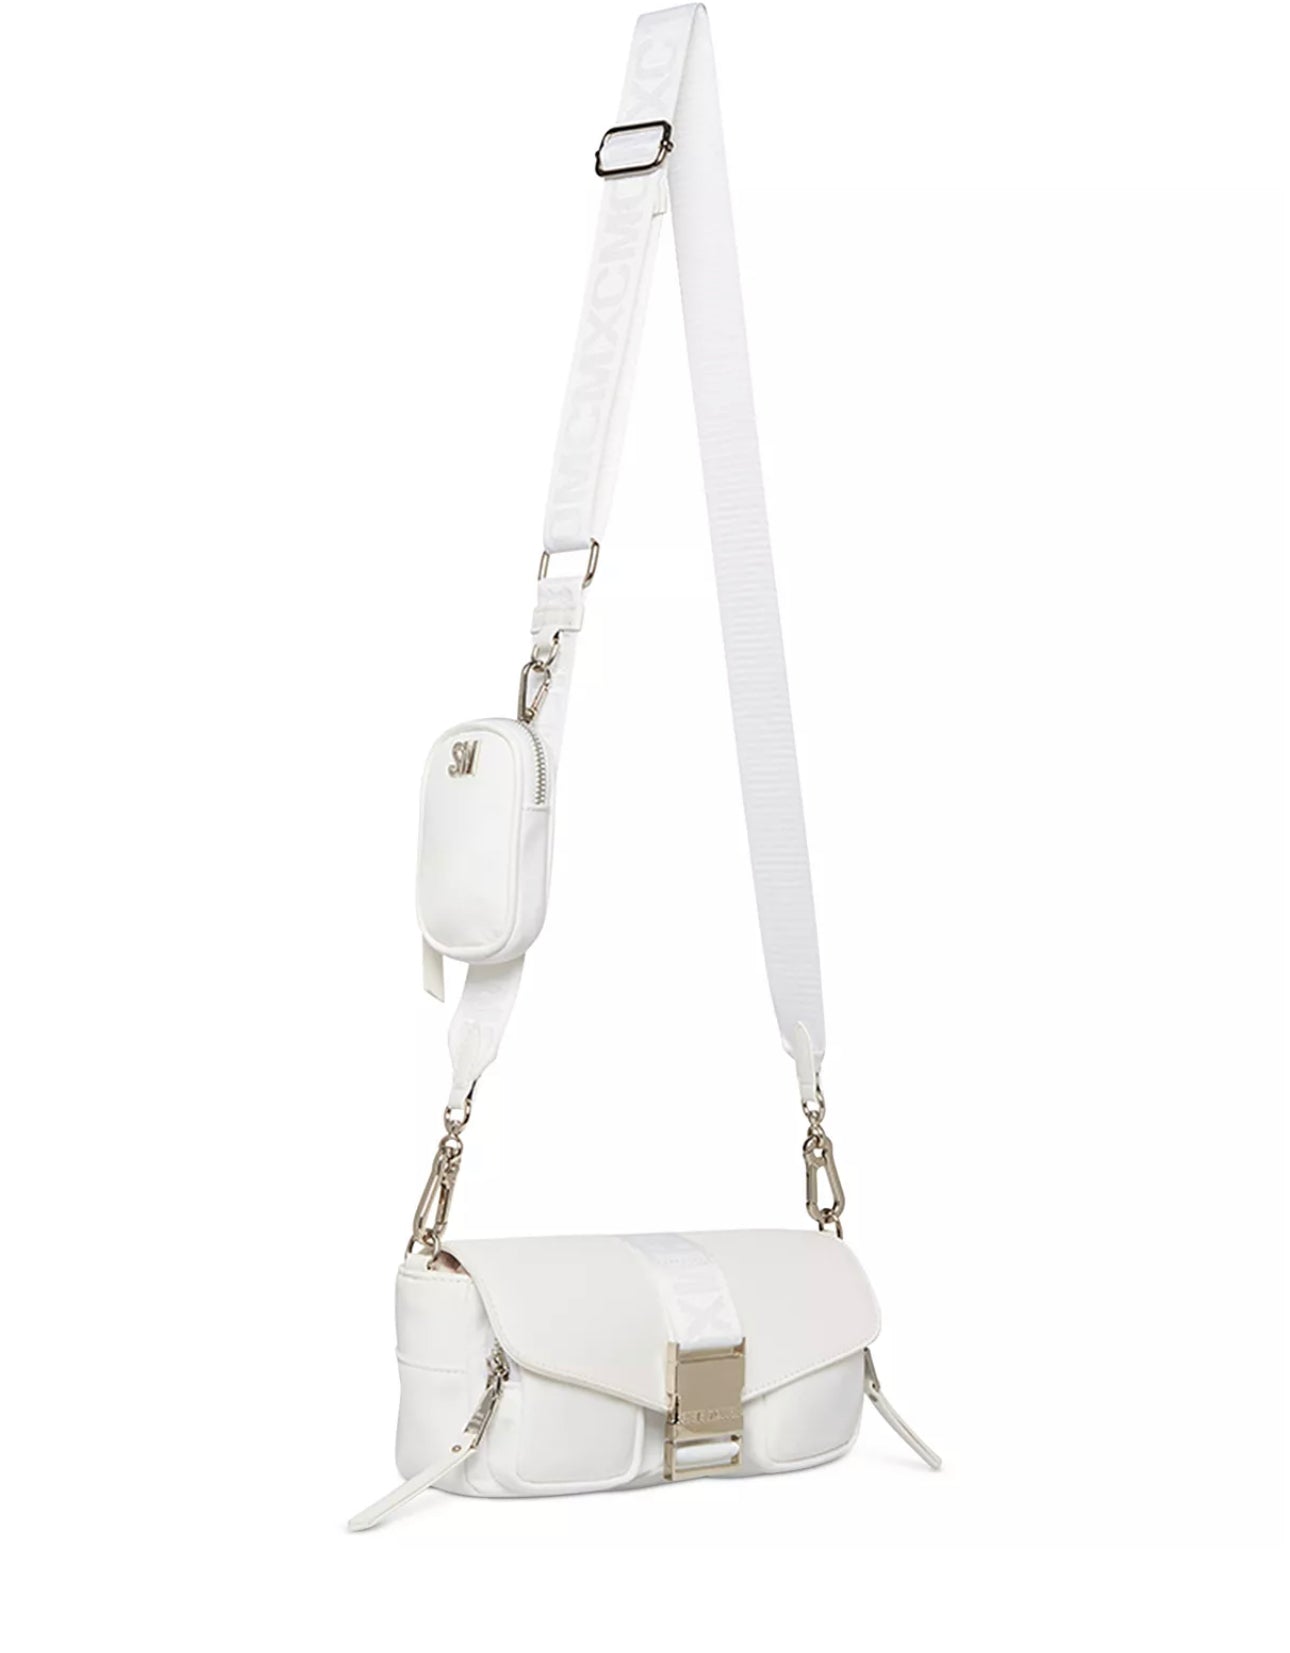 Gucci Horsebit 1955 Small leather shoulder bag in white - Gucci | Mytheresa